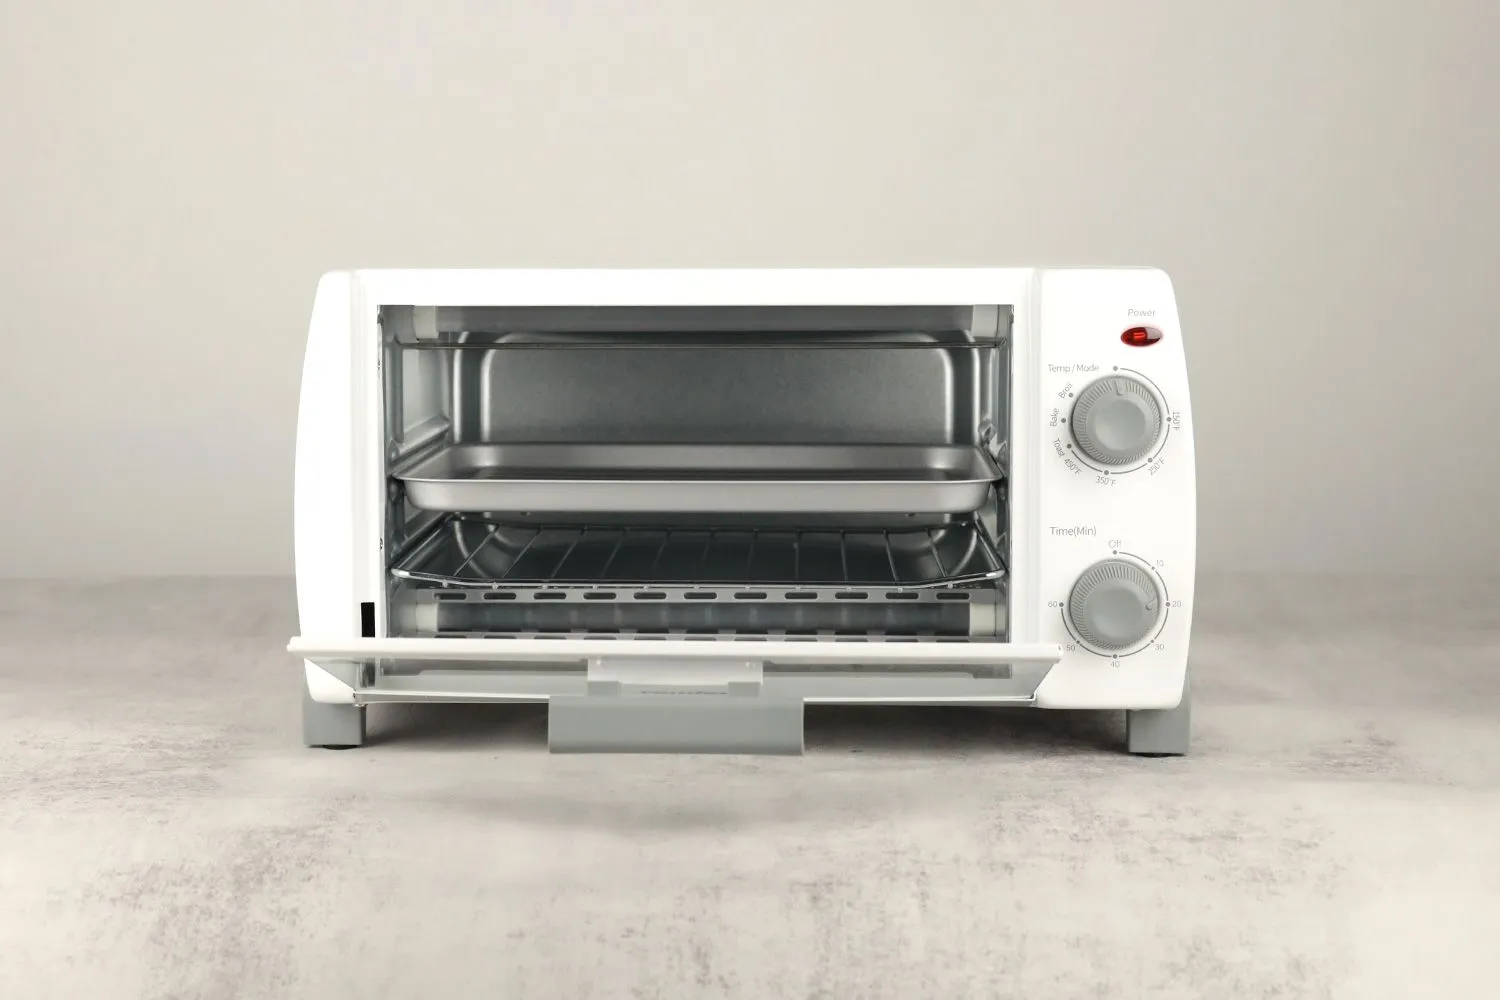 Comfee' Toaster Oven Countertop, Small Toaster Ovens Combo 4 Slice, Mini Oven for 9 Pizza, Compact Oven 2 Racks for Toast, Bake, Broil, 950W, White